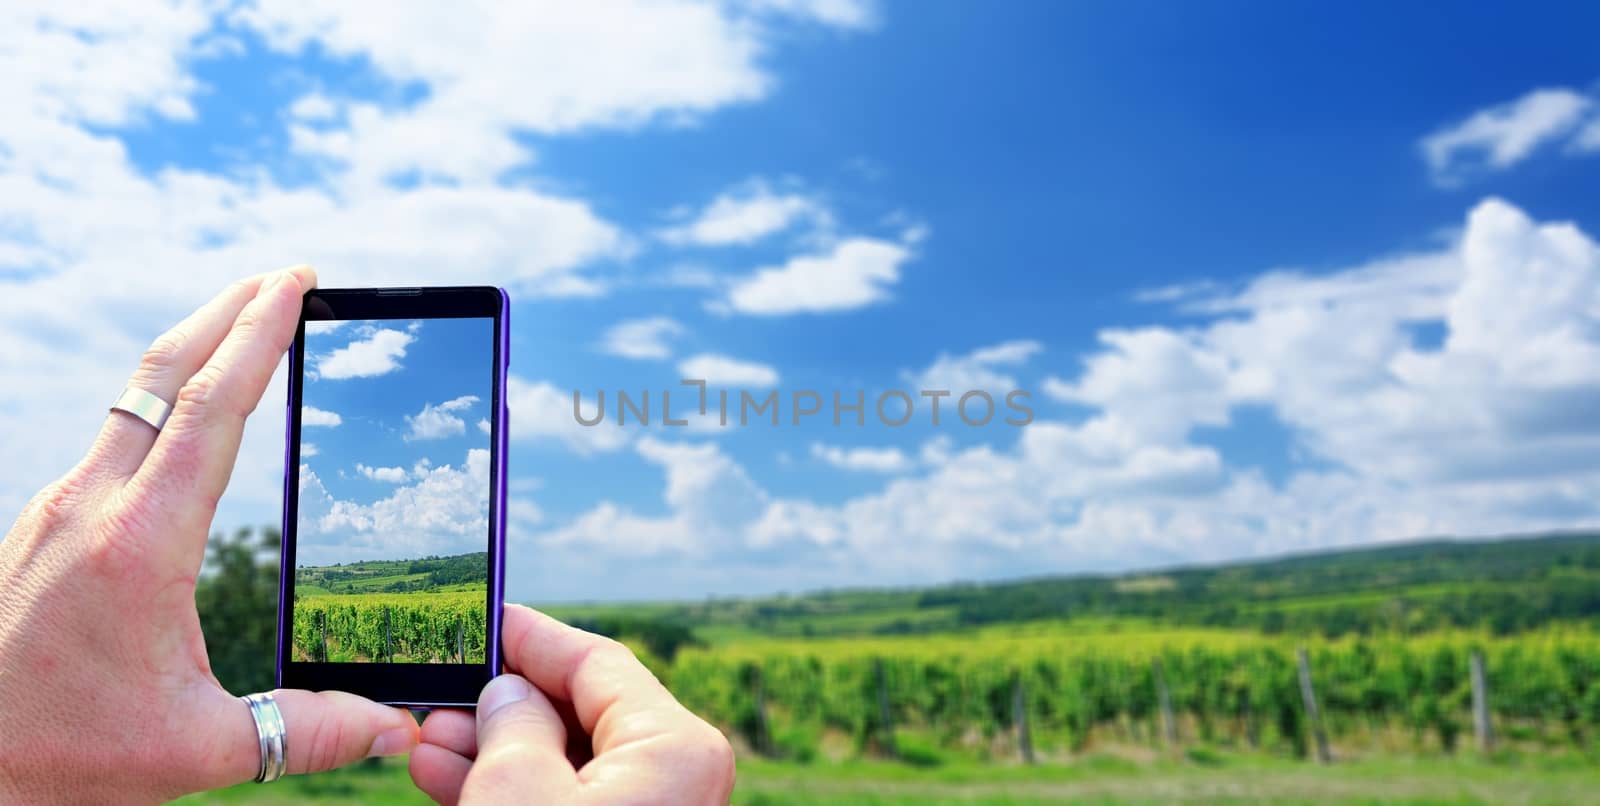 View over the mobile phone display during taking a picture of vineyard. Holding the mobile phone in hands and taking a photo. Focused on mobile phone screen.